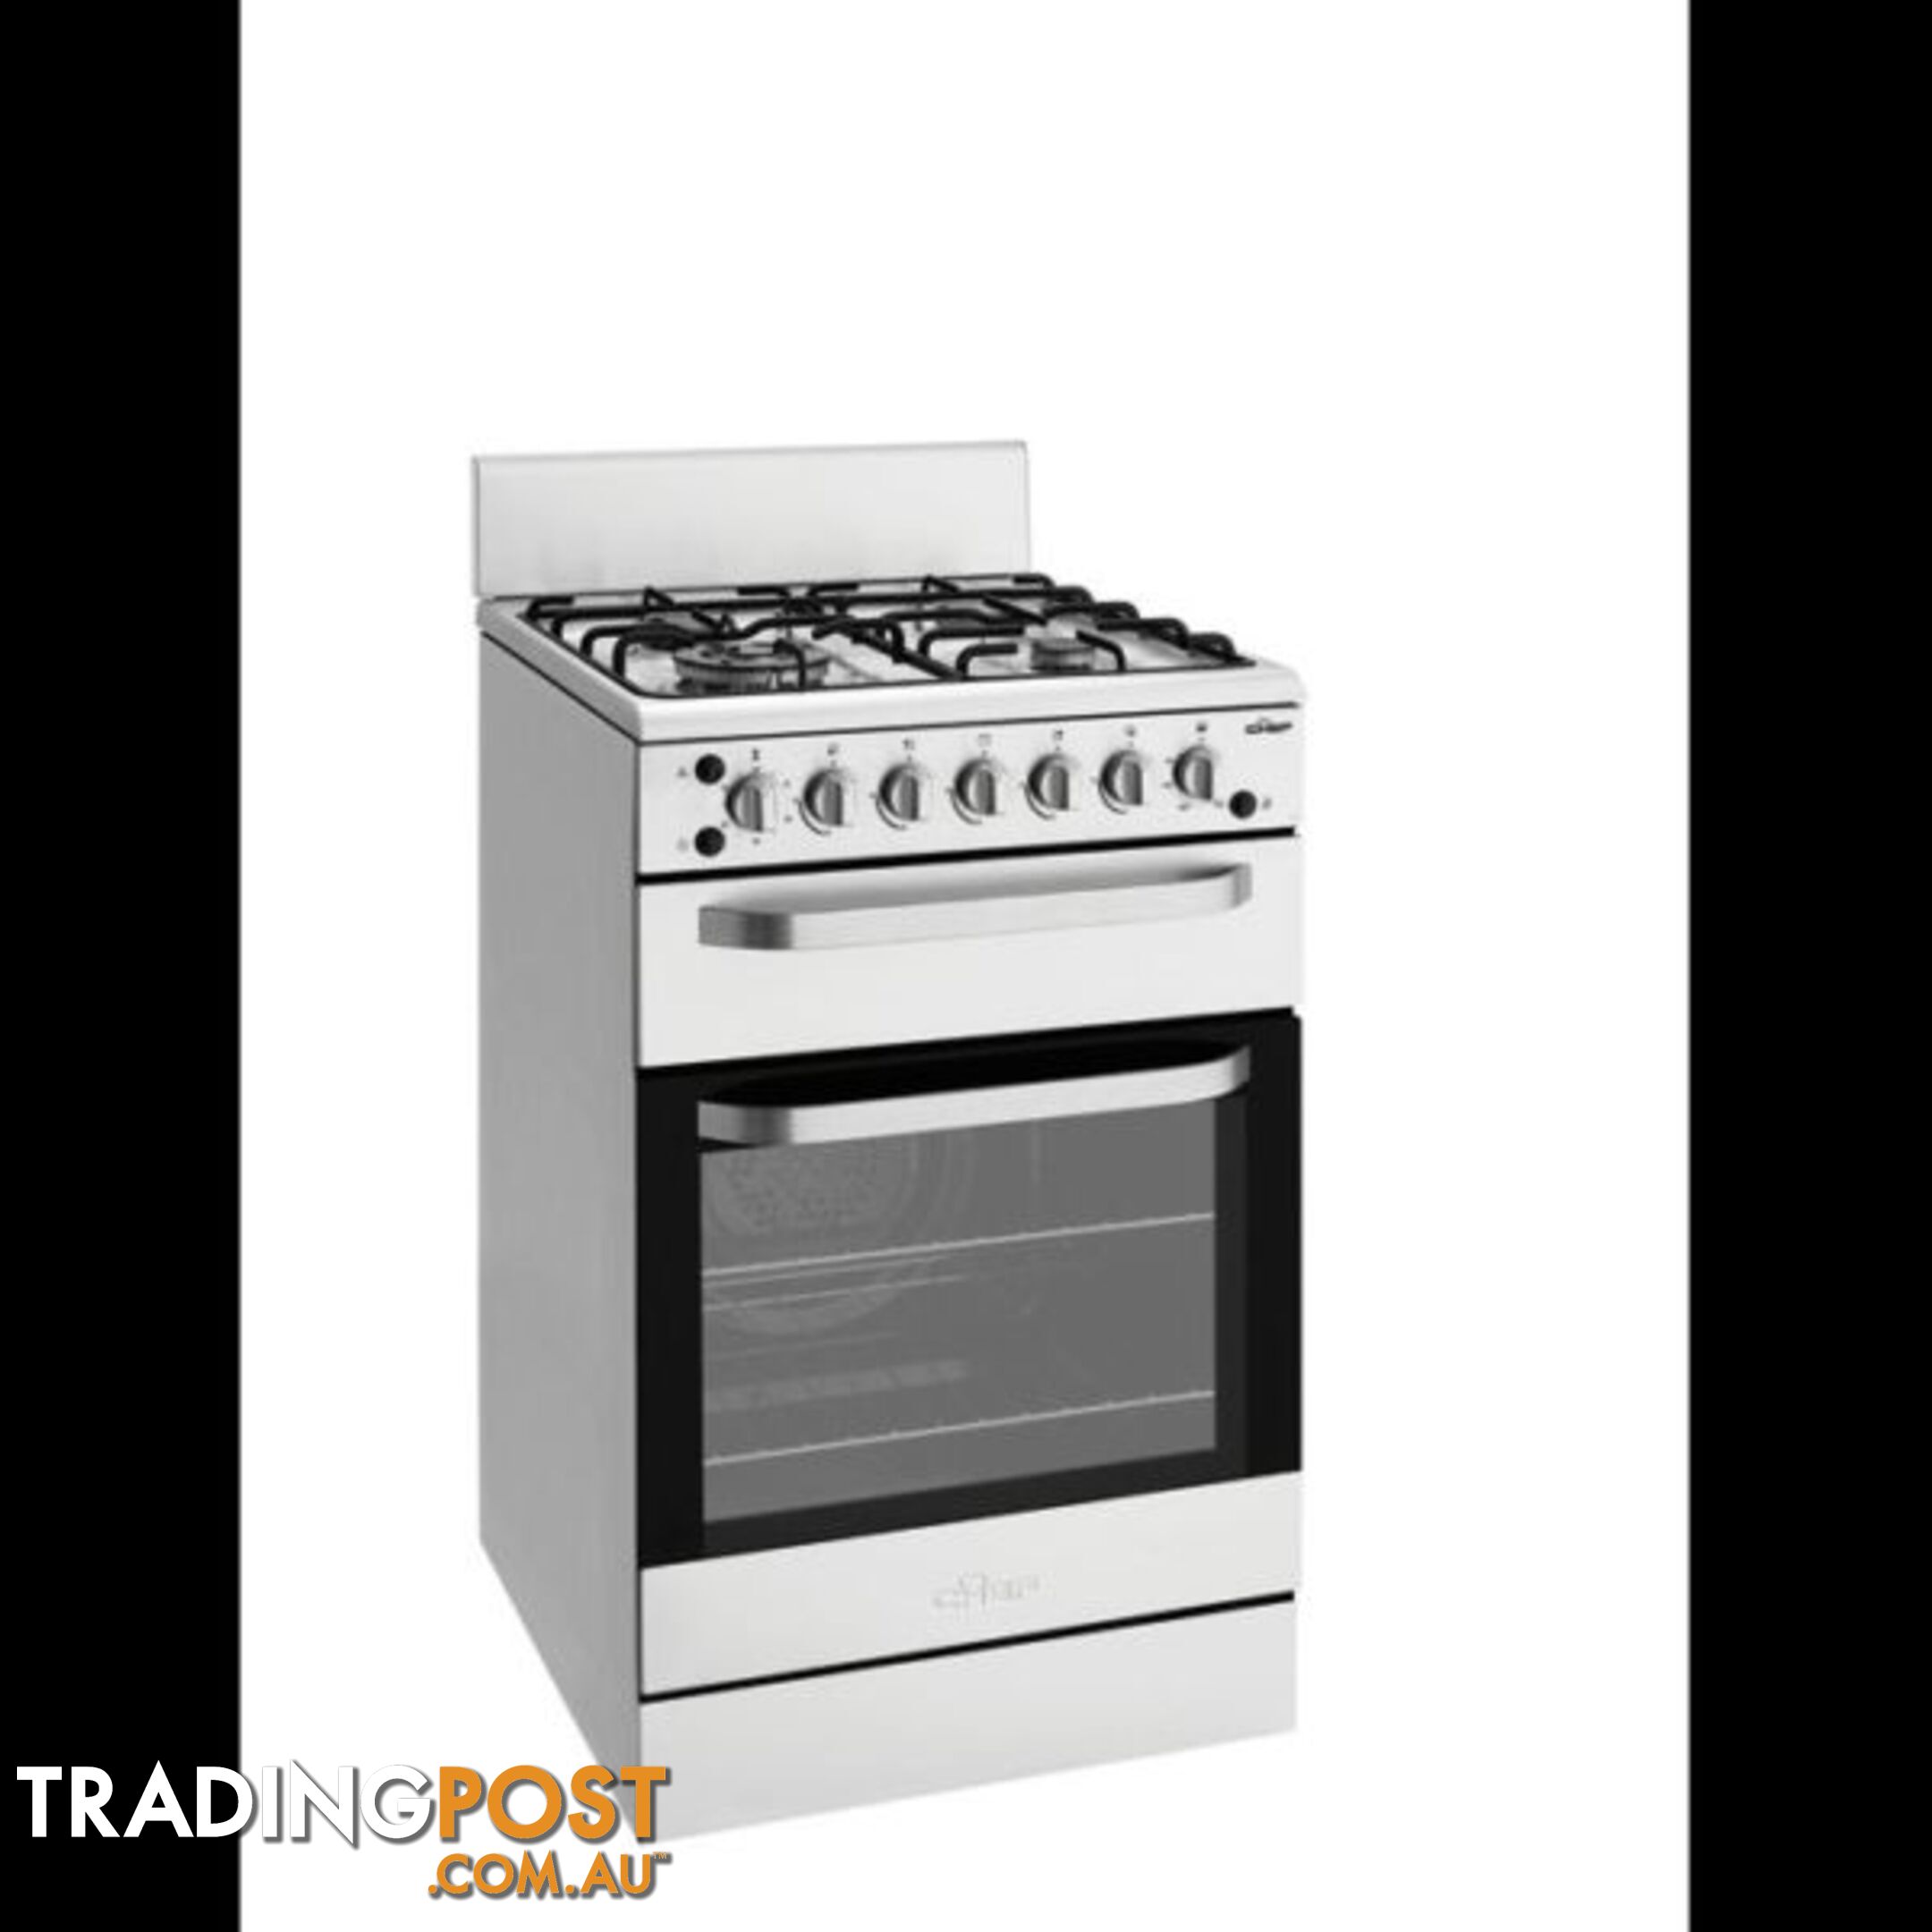 Chef 54cm Stainless Steel Gas Stove with Separate Grill CFG517SA